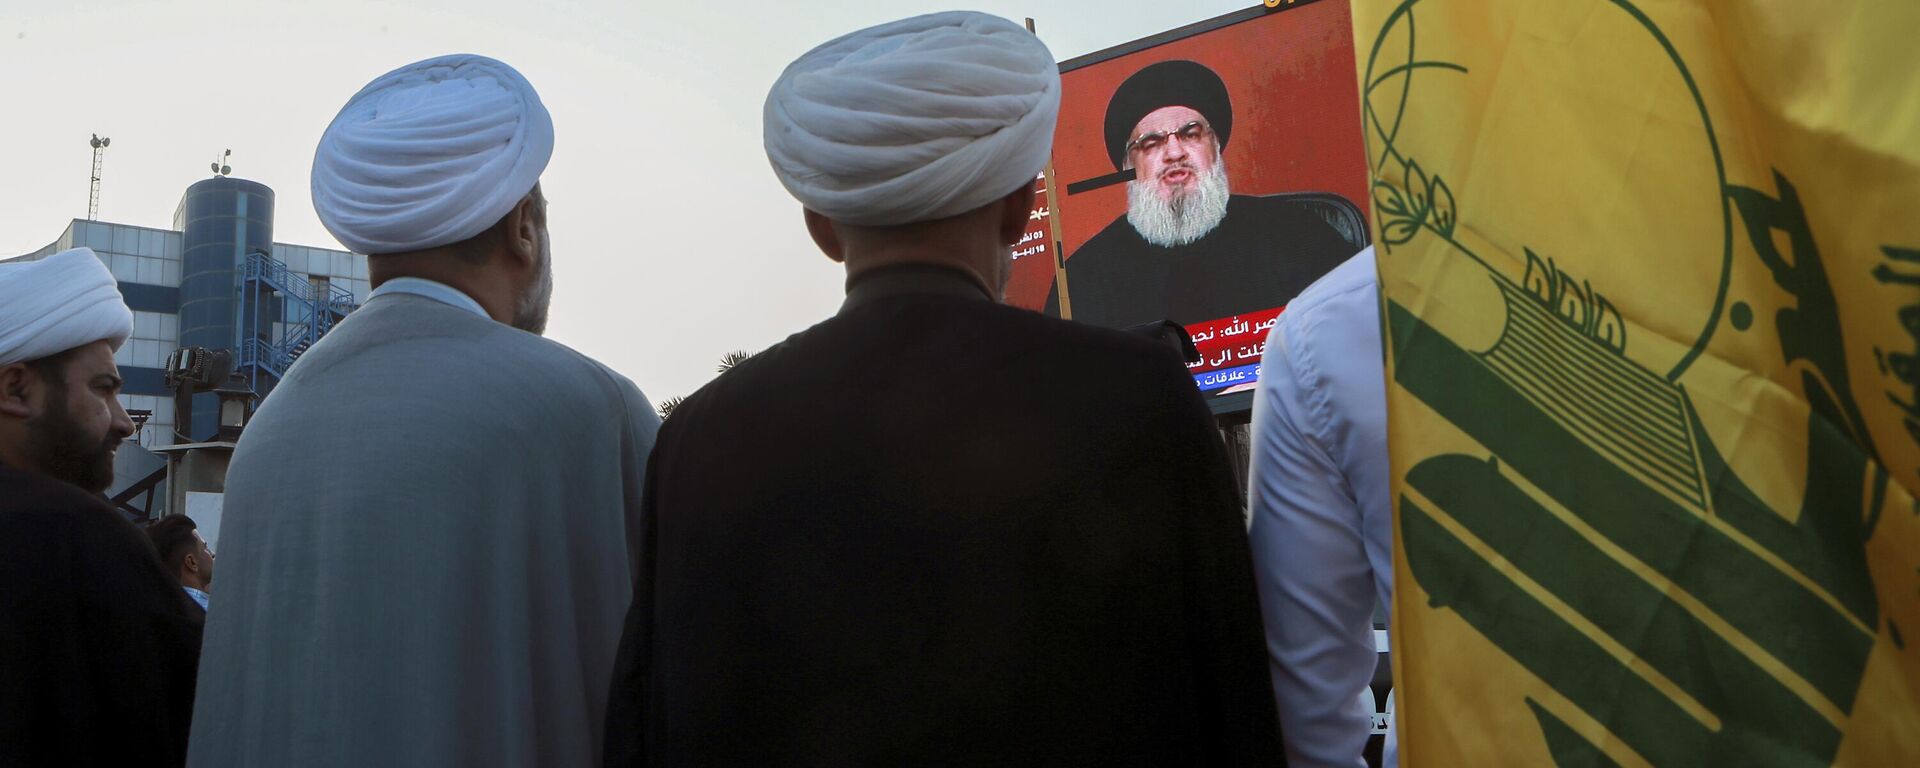 Iraqi demonstrators watch a speech from Lebanon's militant Hezbollah leader Sayyed Hassan Nasrallah on a screen as they hold flags of, Hezbollah during a pro-Palestinian rally in Basra, Iraq, Friday, Nov. 3, 2023.  - Sputnik International, 1920, 05.11.2023